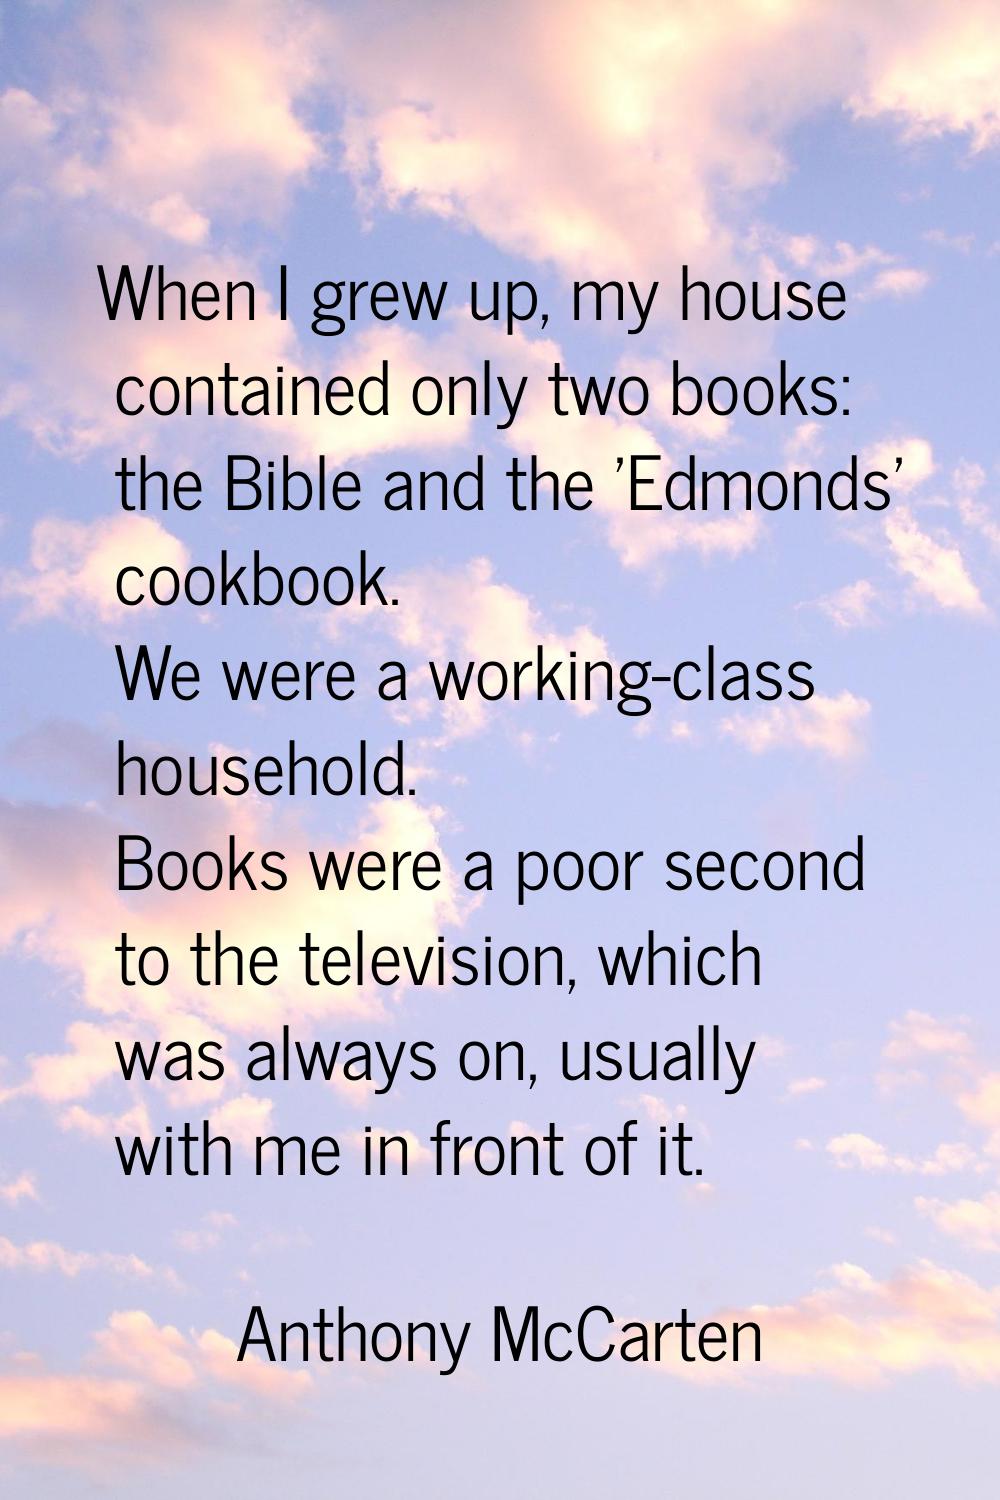 When I grew up, my house contained only two books: the Bible and the 'Edmonds' cookbook. We were a 